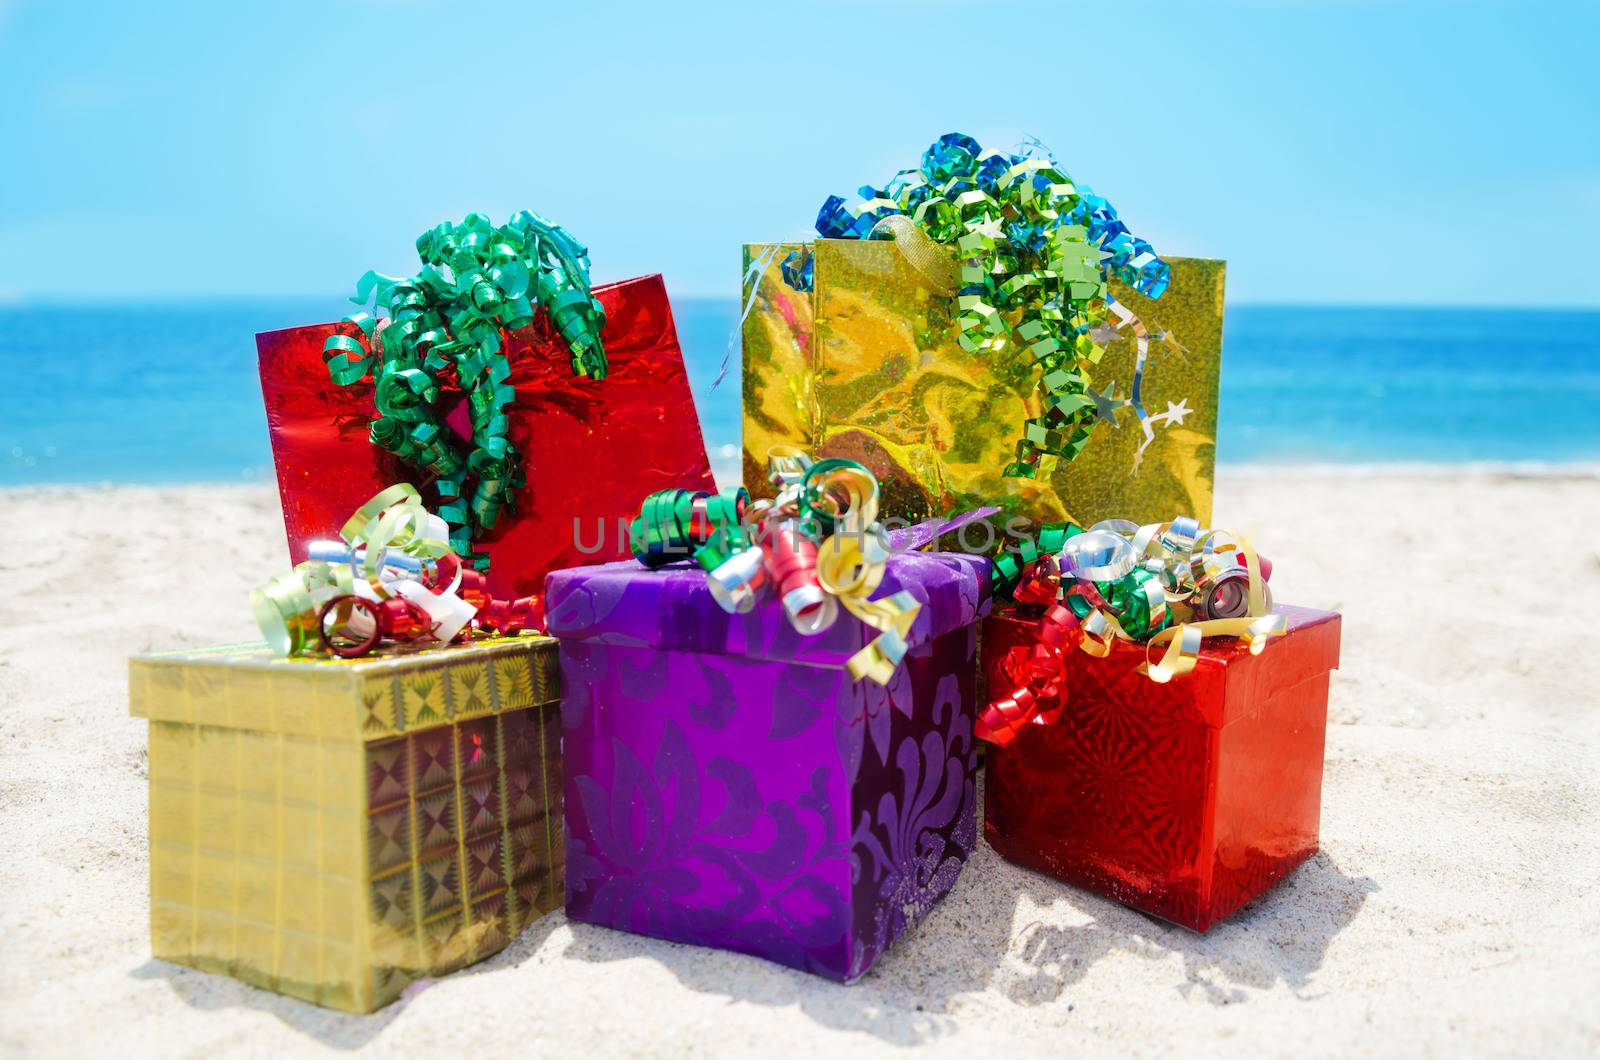 Gift boxes and bags on the beach - holiday concept by EllenSmile